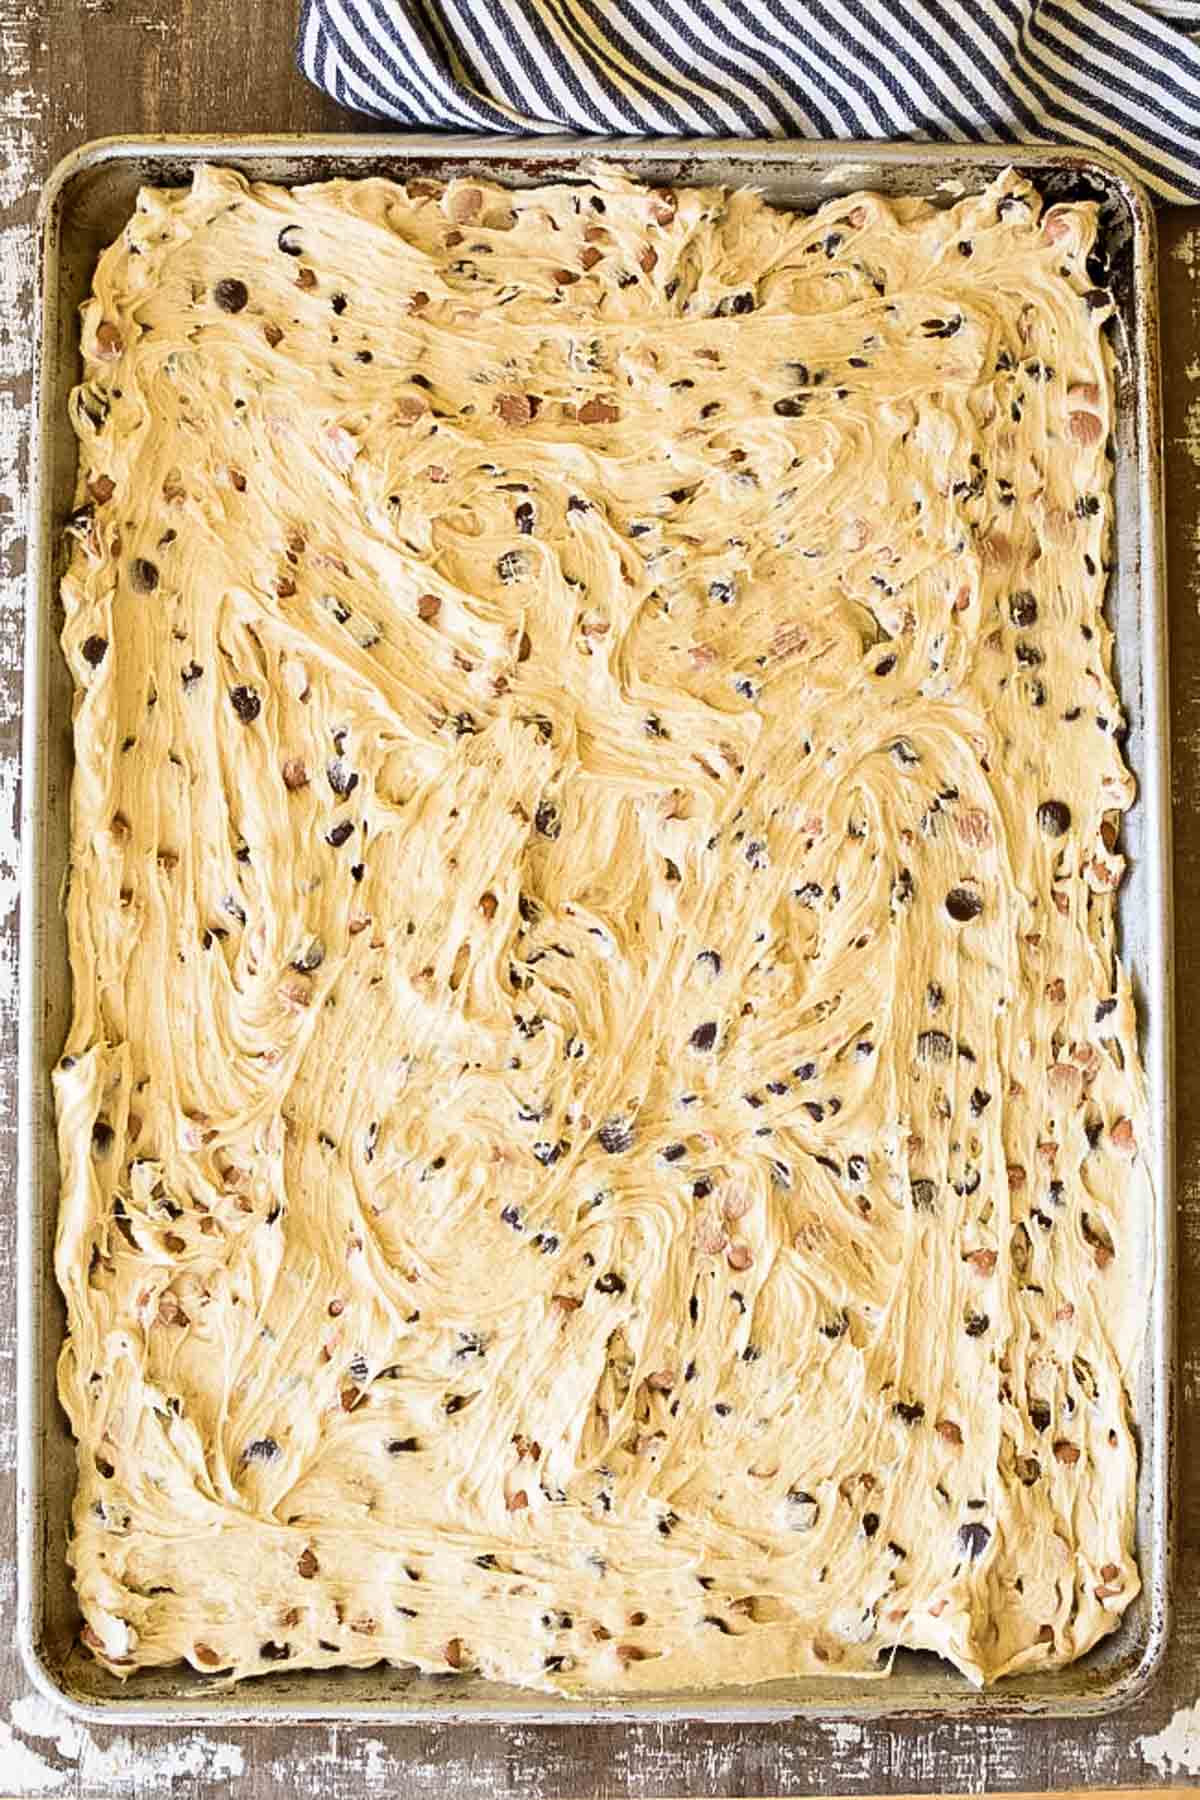 A sheet pan with chocolate chip cookie dough spread in it.